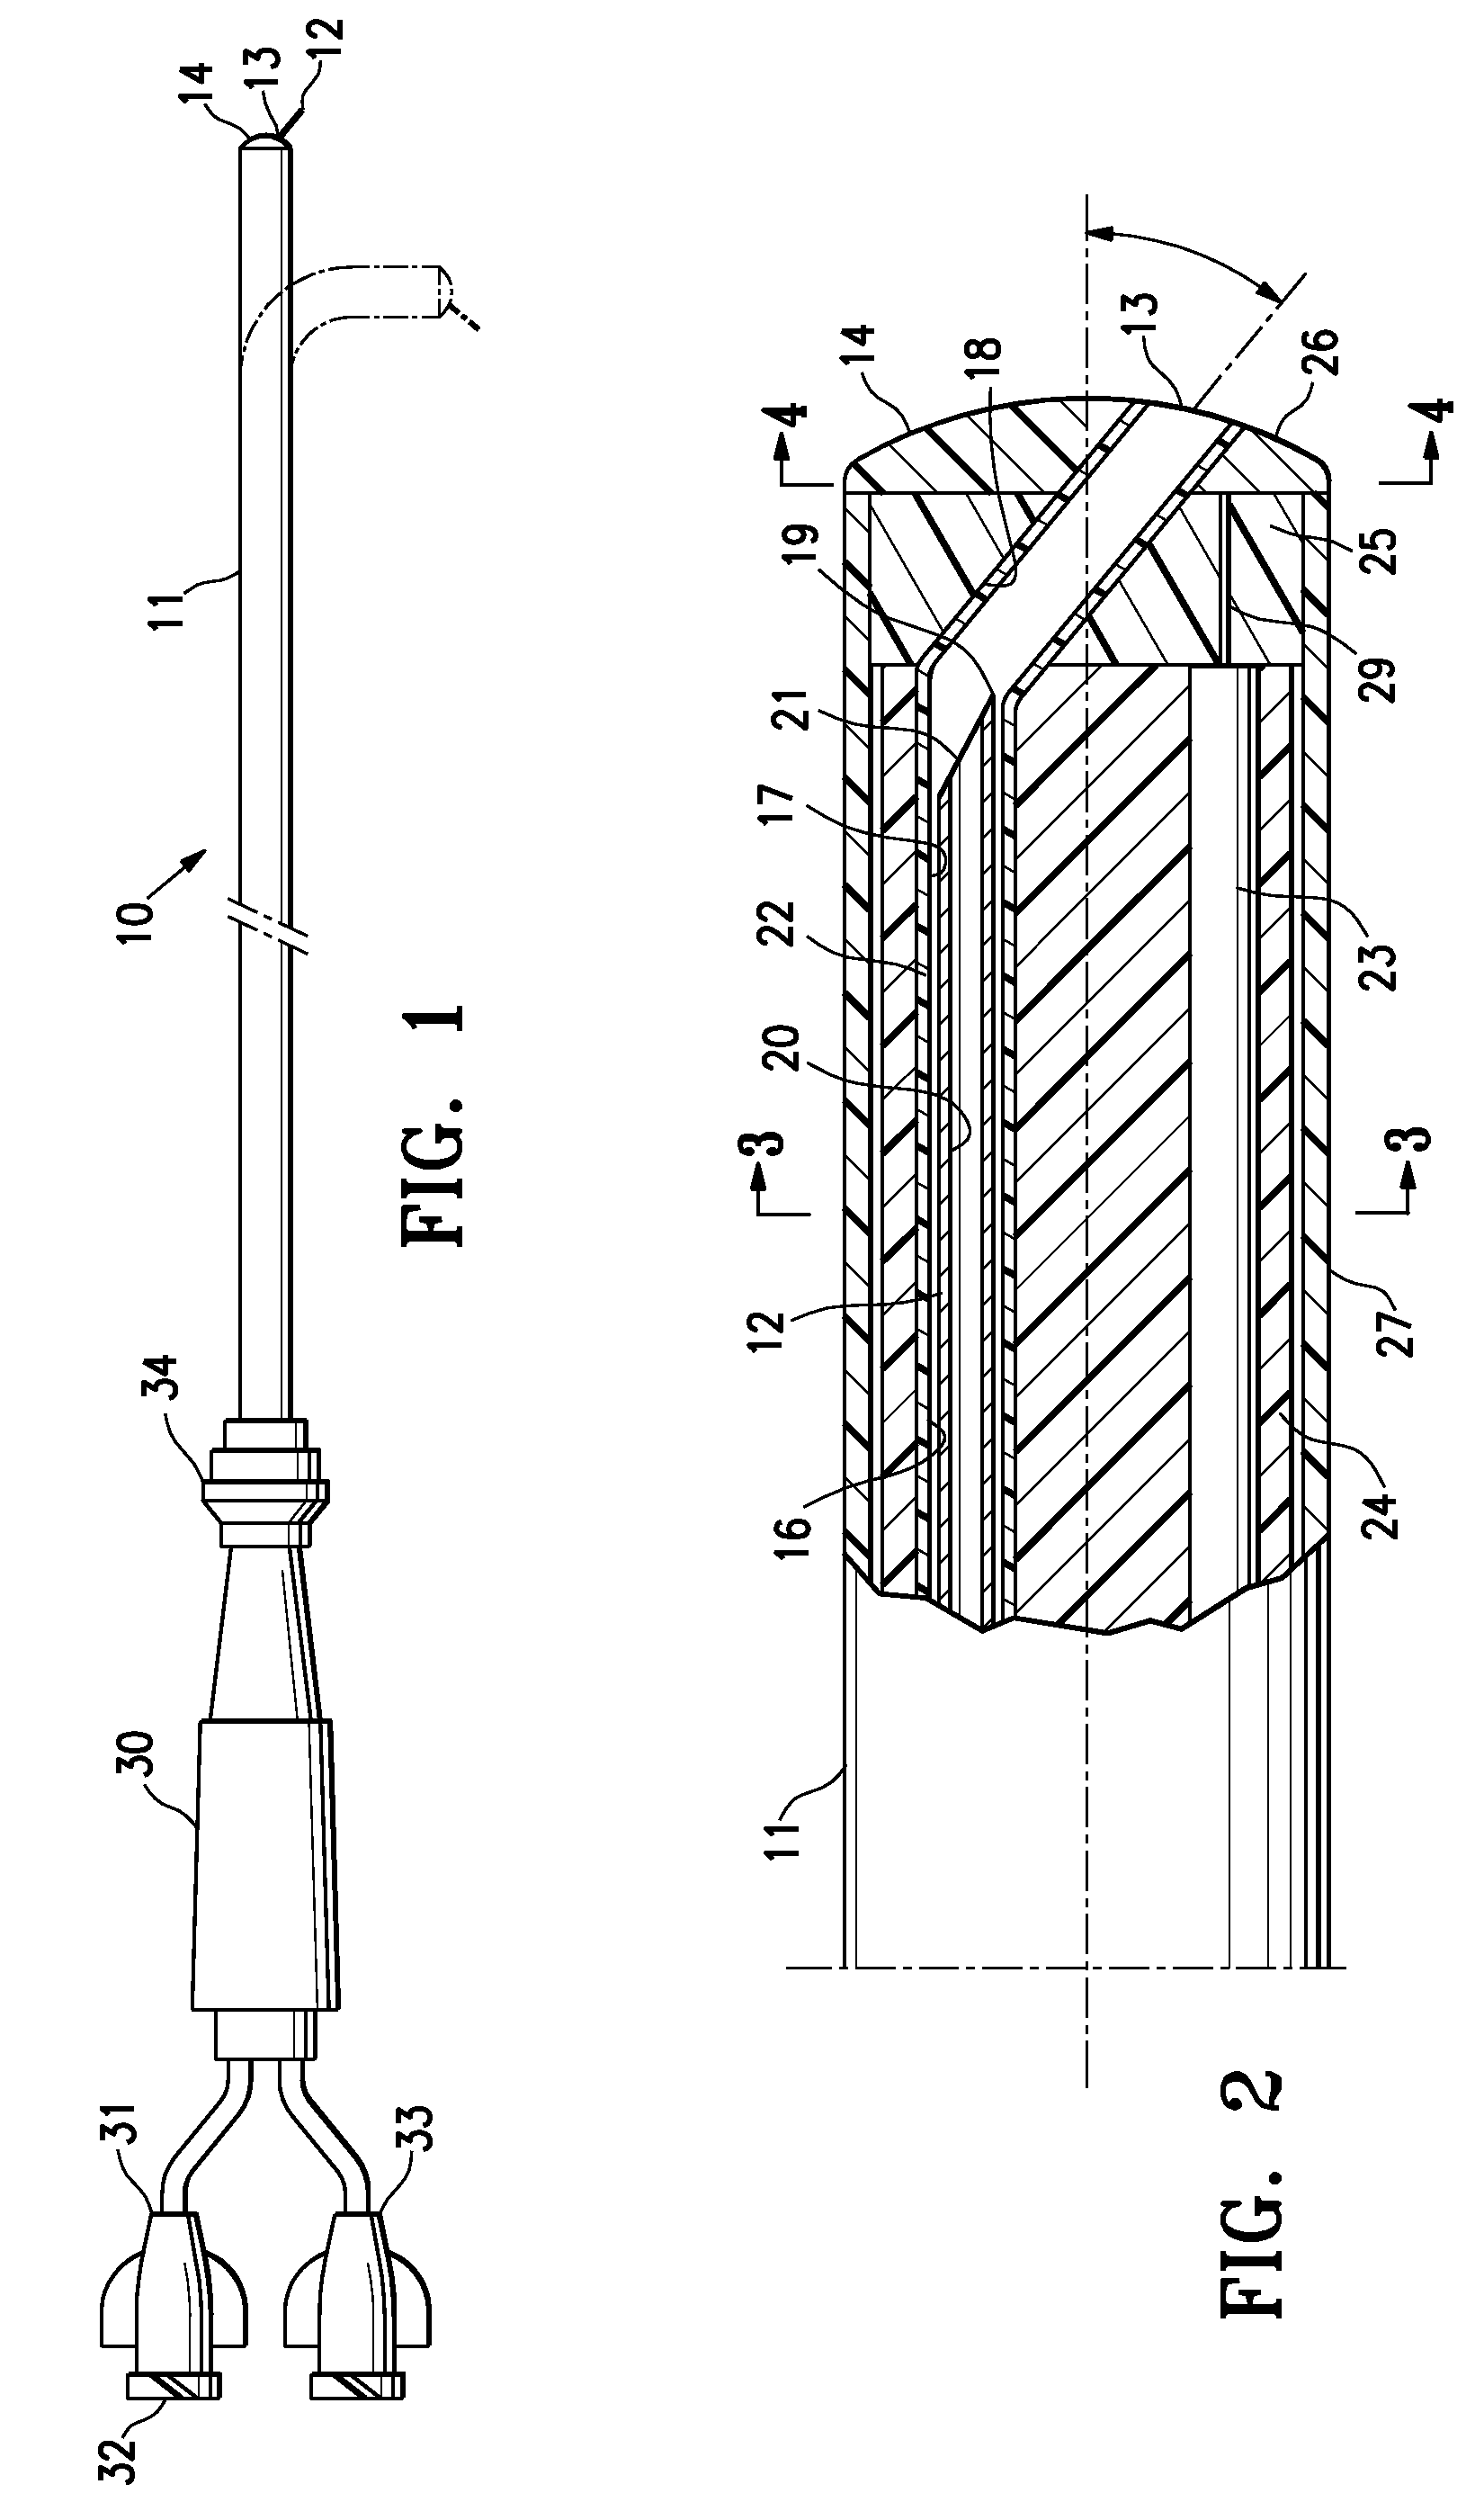 Needle catheter with an angled distal tip lumen